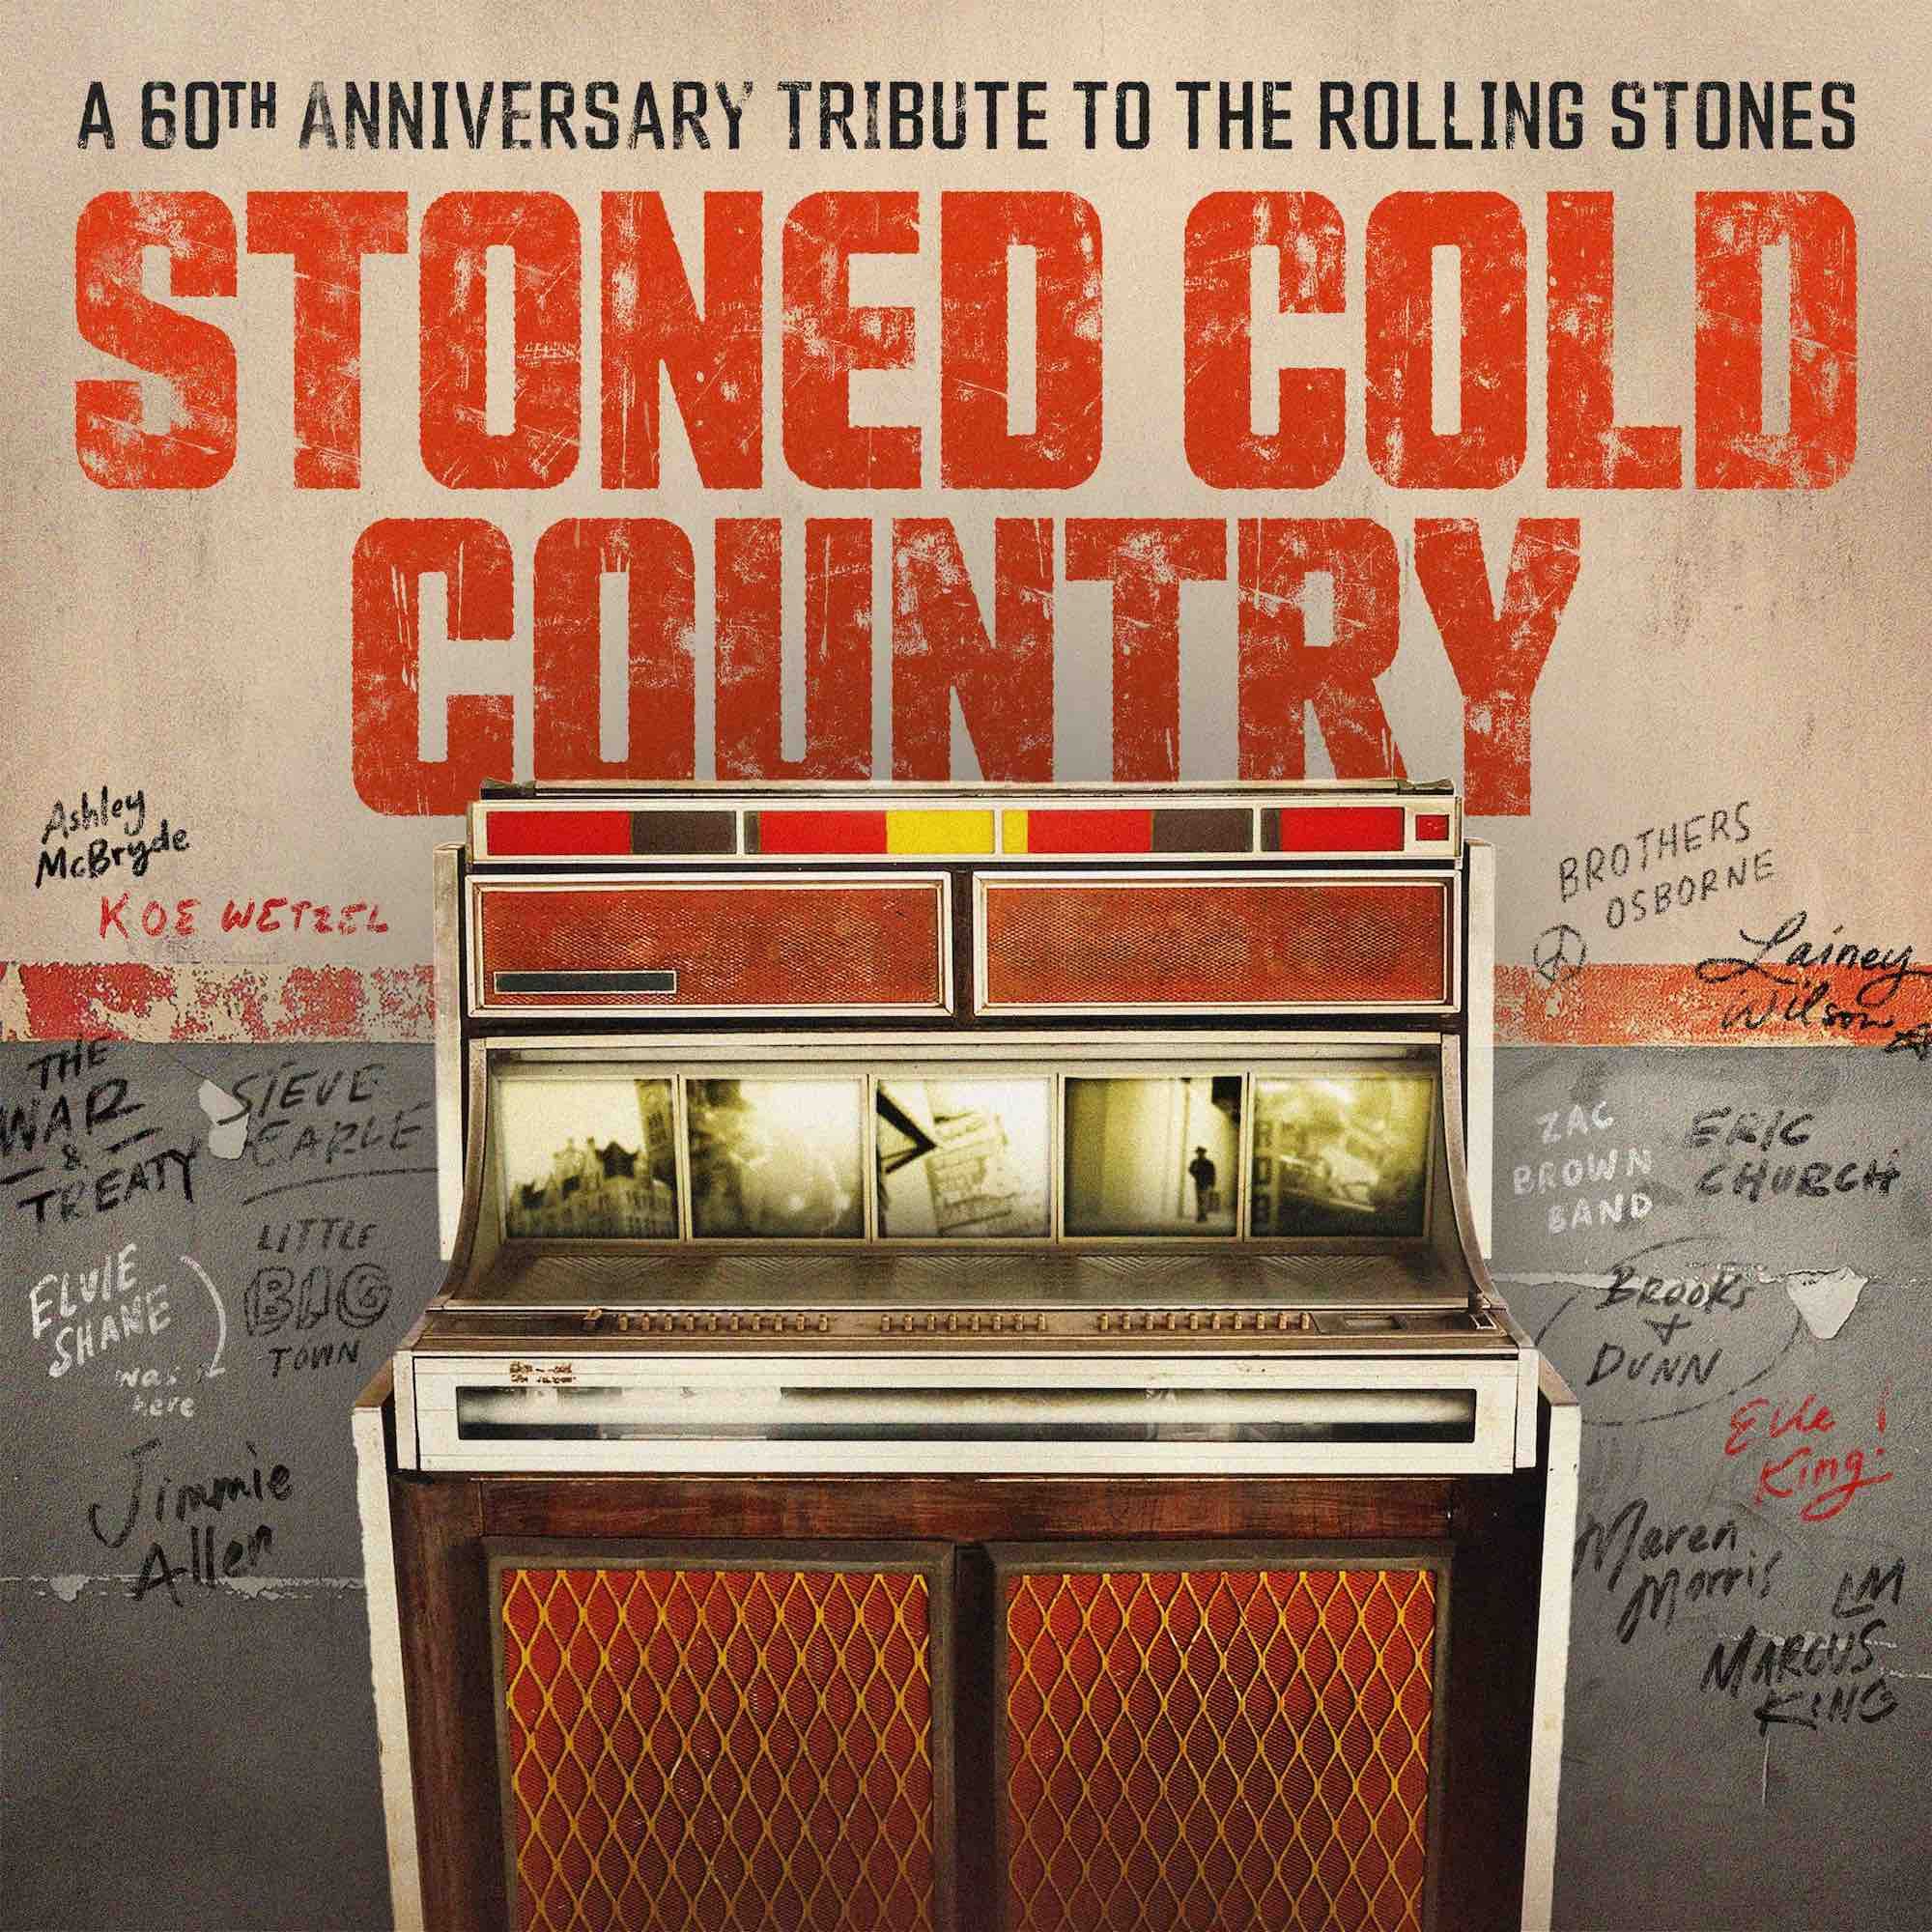 Album - Various Artists - Stoned Cold Country